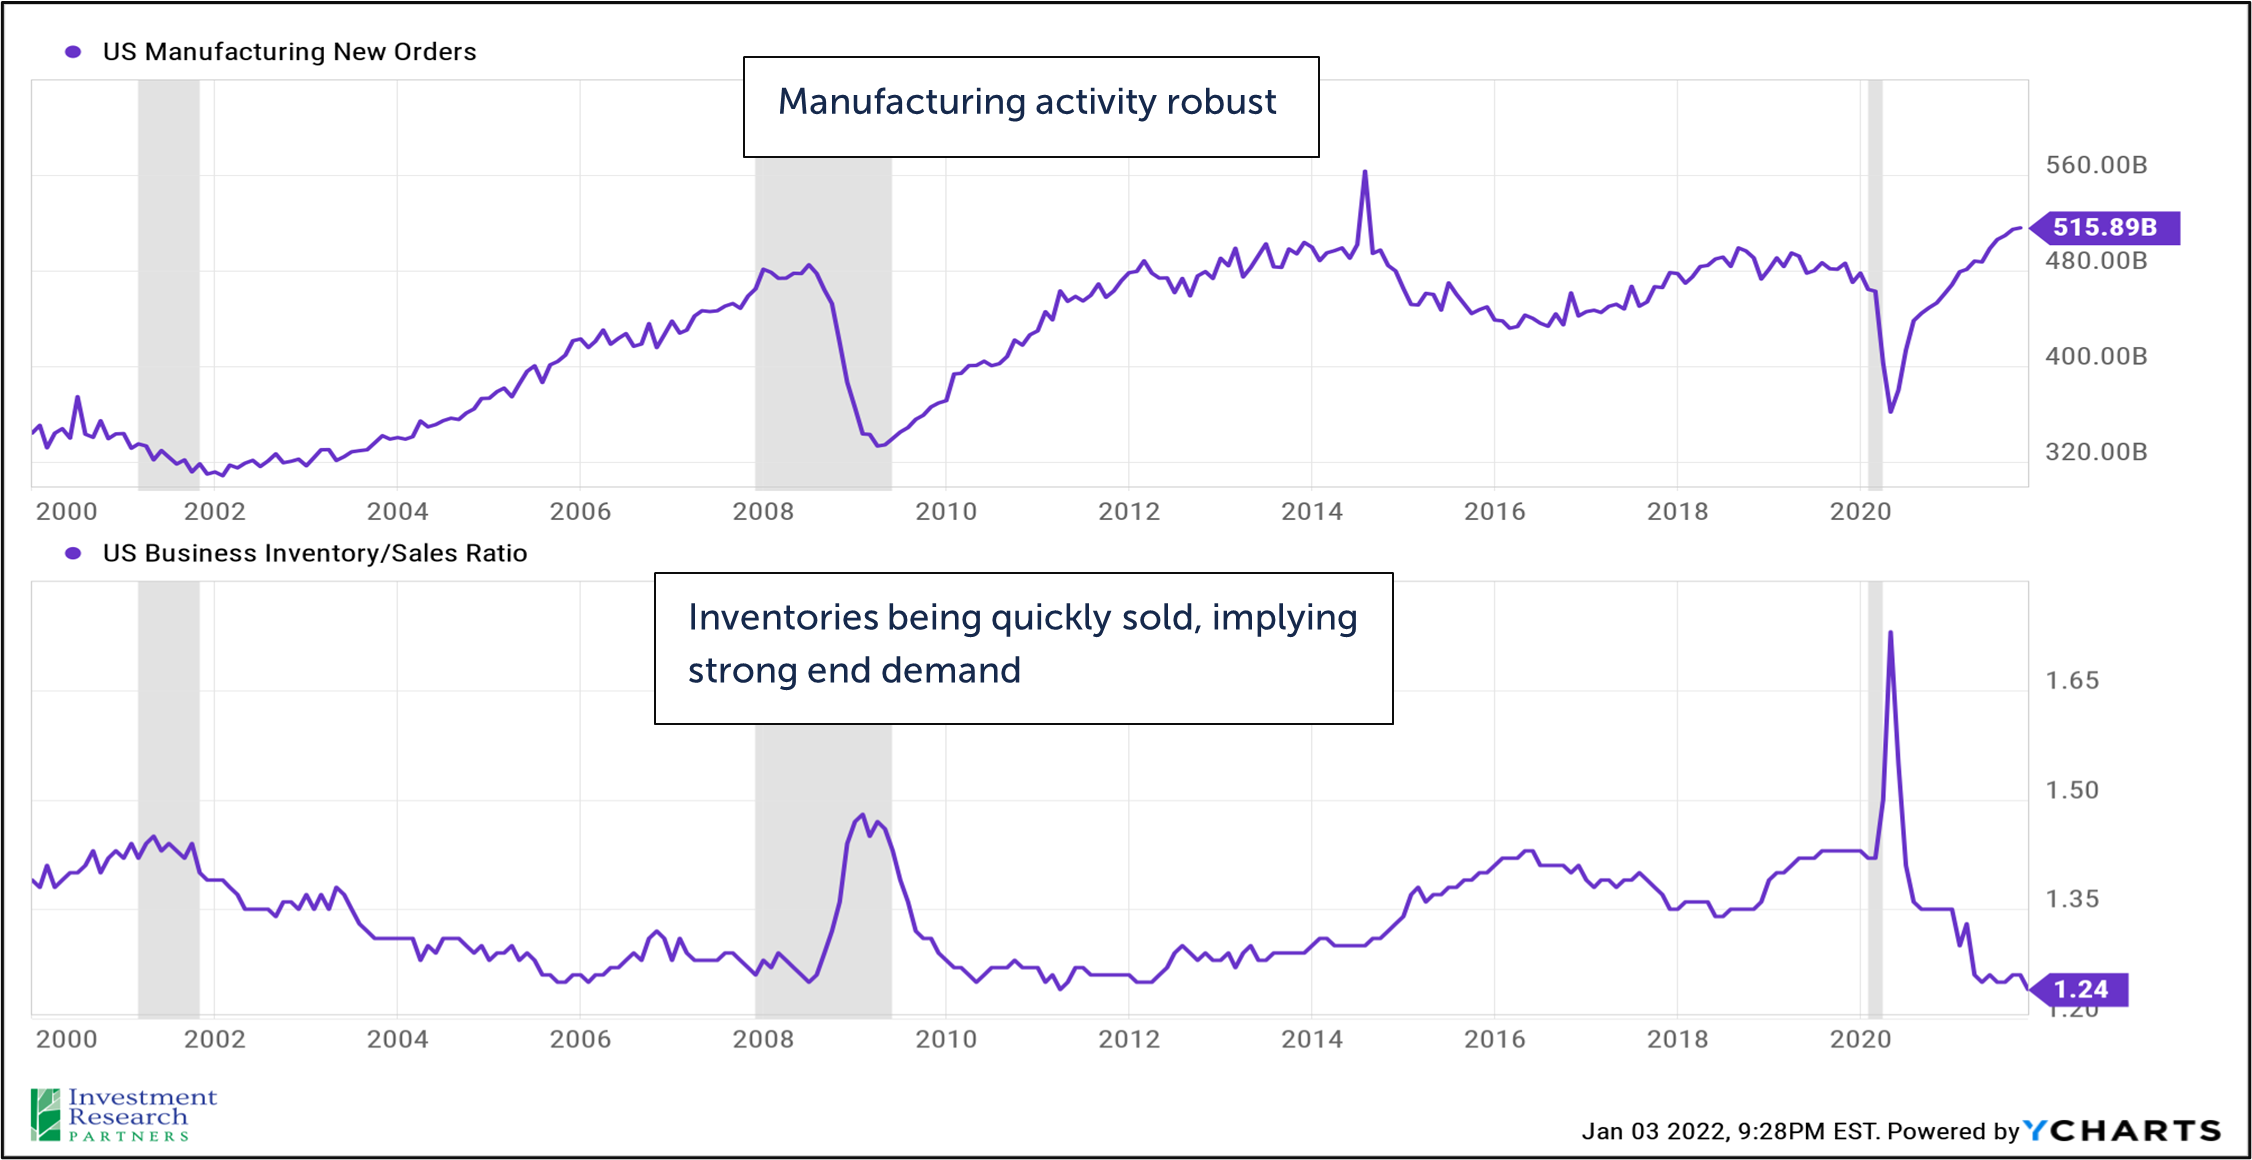 A line graph depicting US Manufacturing New Orders from 2000 to 2021 with text reading: Manufacturing activity robust, and a line graph depicting US Business Inventory/Sales Ratio from 2000 to 2021 with text reading: Inventories being quickly sold, implying strong end demand